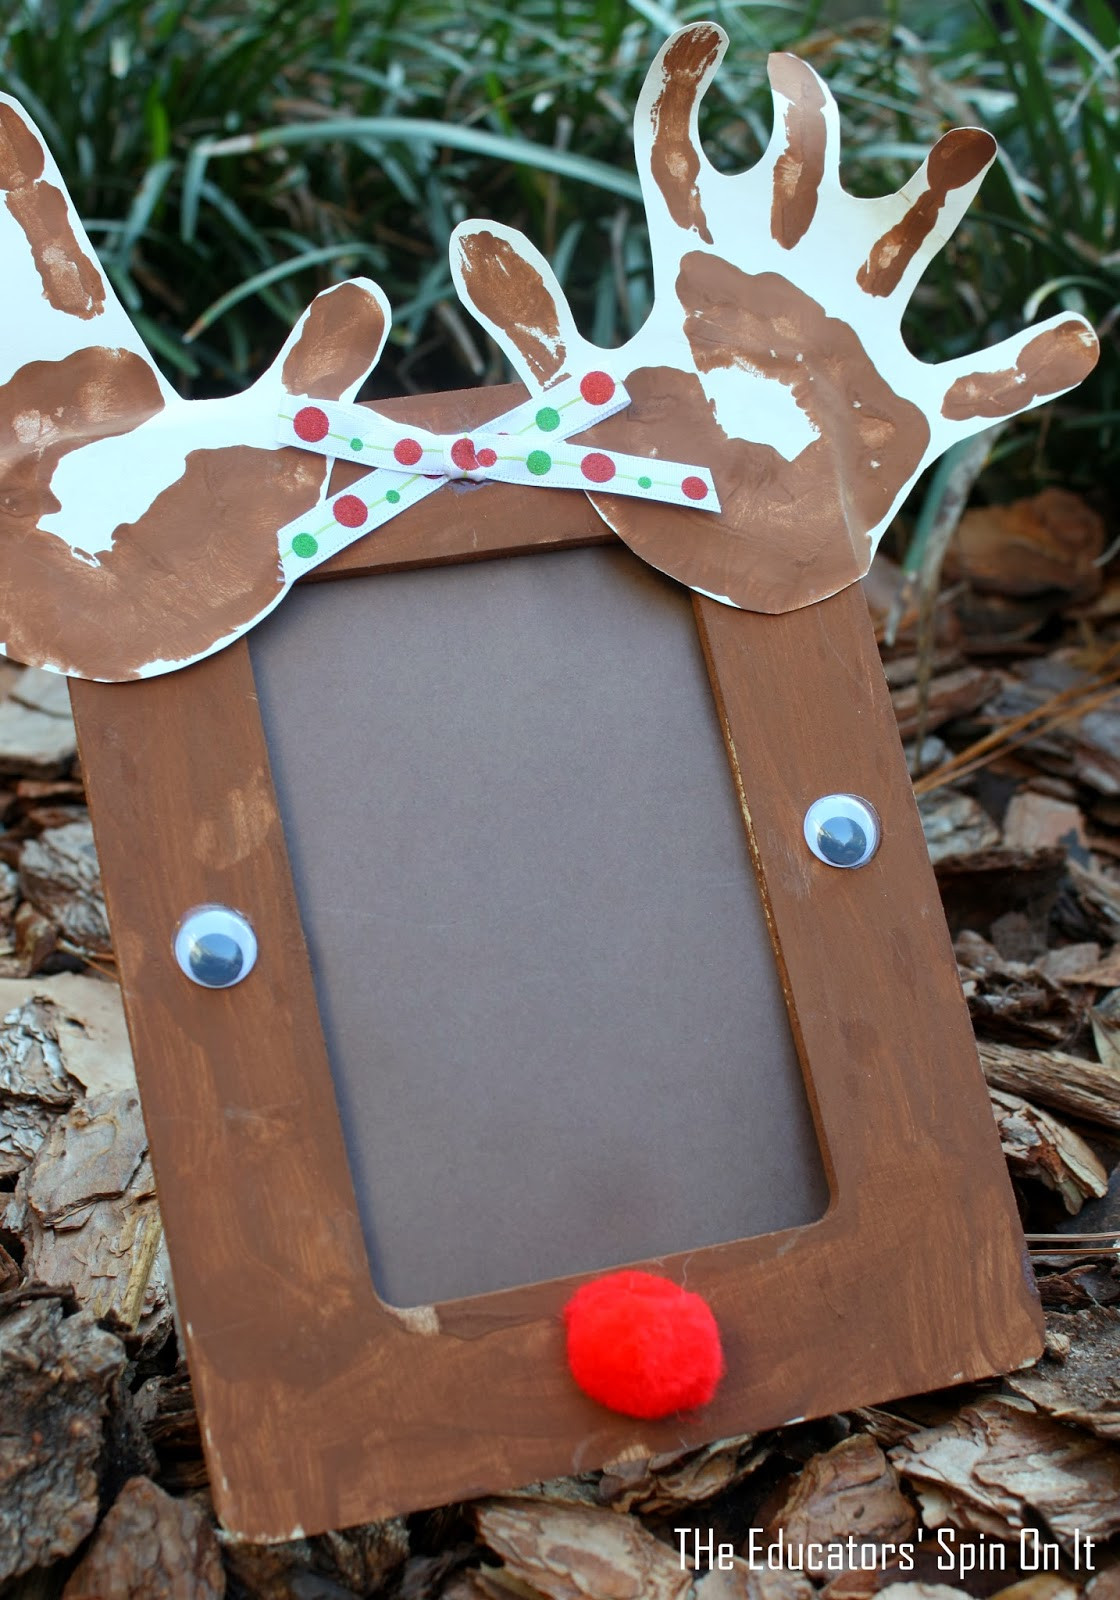 Christmas Crafts For Preschoolers On Pinterest
 The Educators Spin It Preschool Reindeer Crafts and